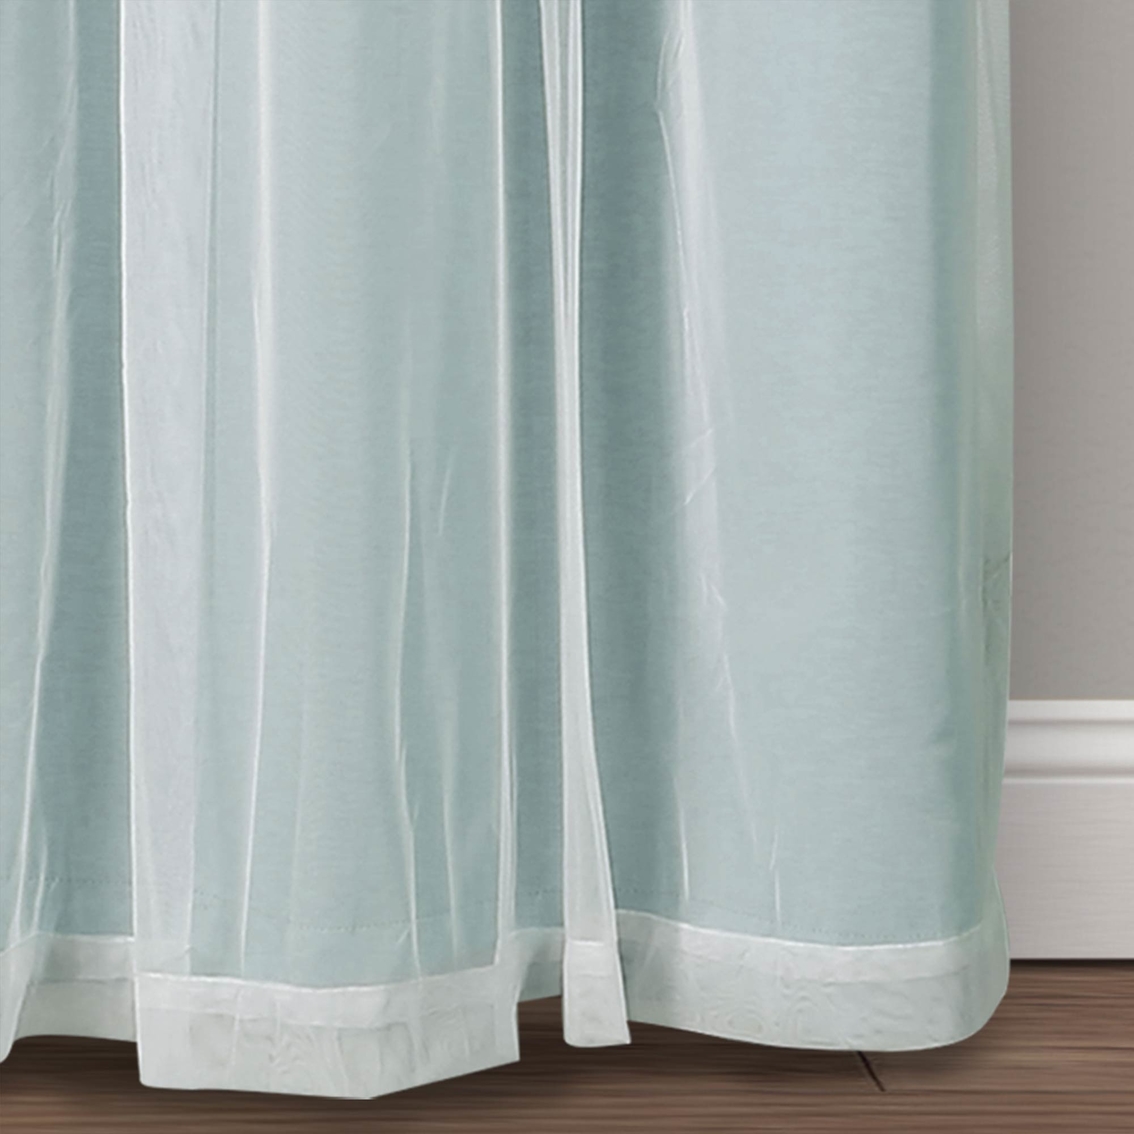 Lush Decor Grommet Sheer Panels with Insulated Blackout Lining 2 pk. Curtains Set - Image 4 of 4